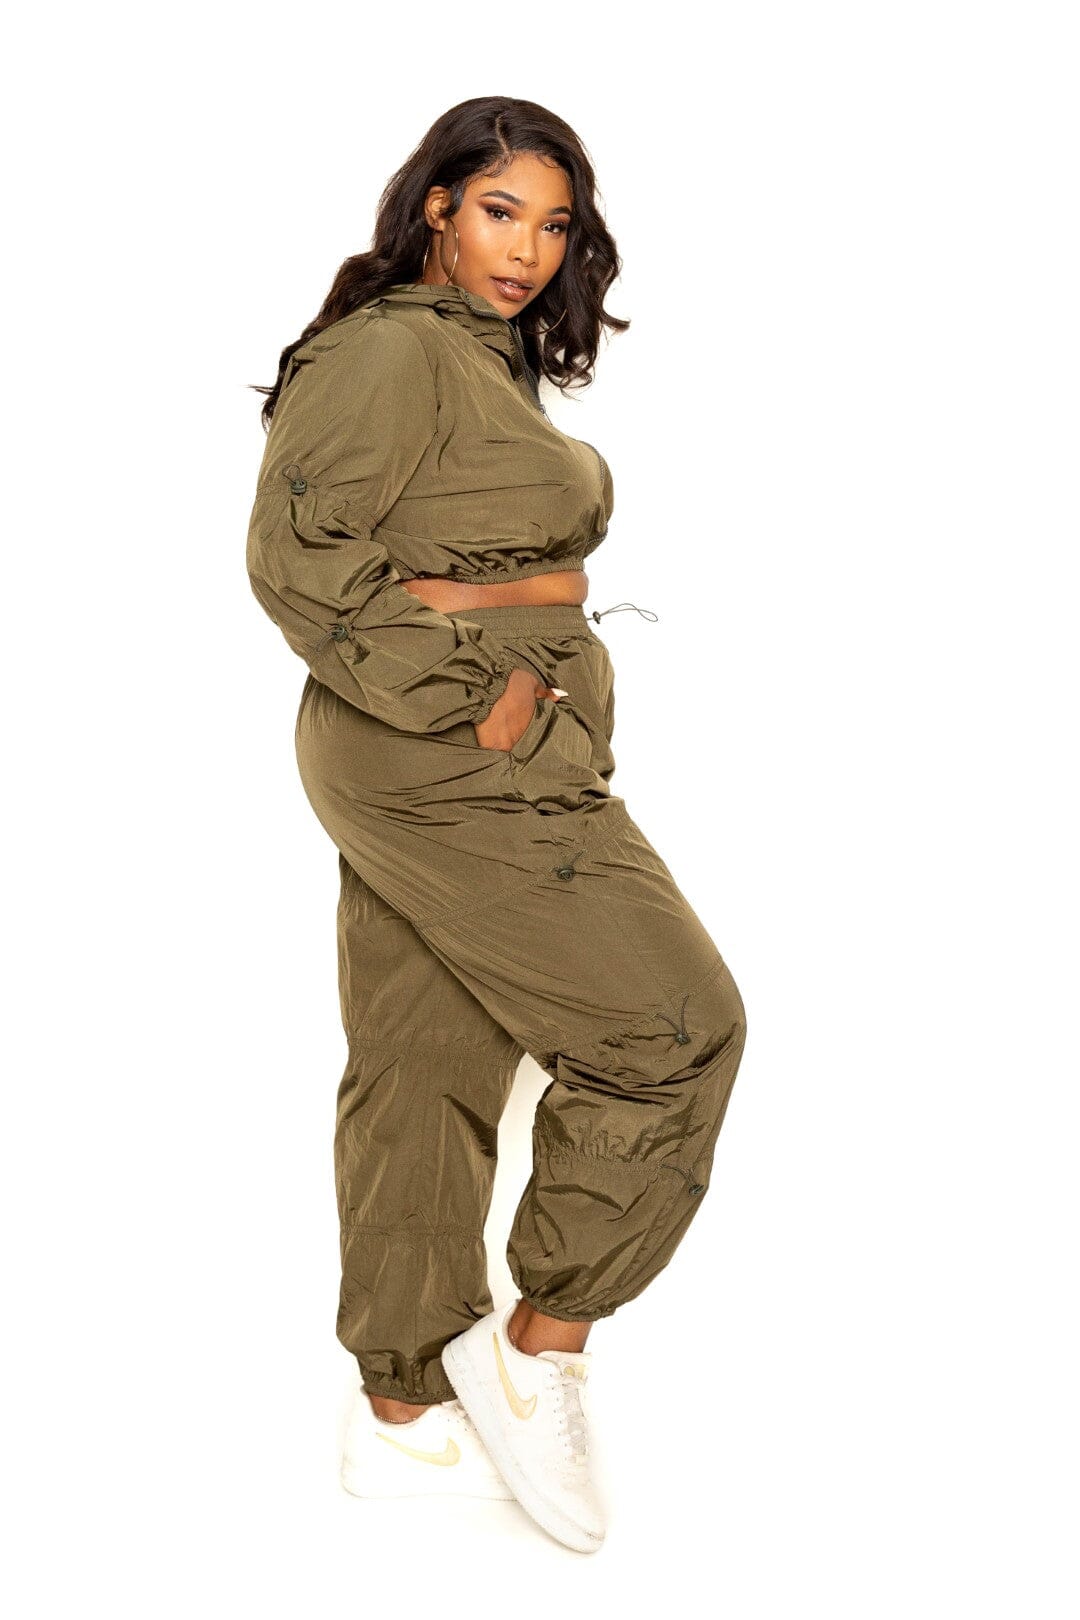 Plus Size 2 piece Olive Green Cord Lock Detail Long Sleeve Zip Up Crop Top and pant activewear Set jehouze 